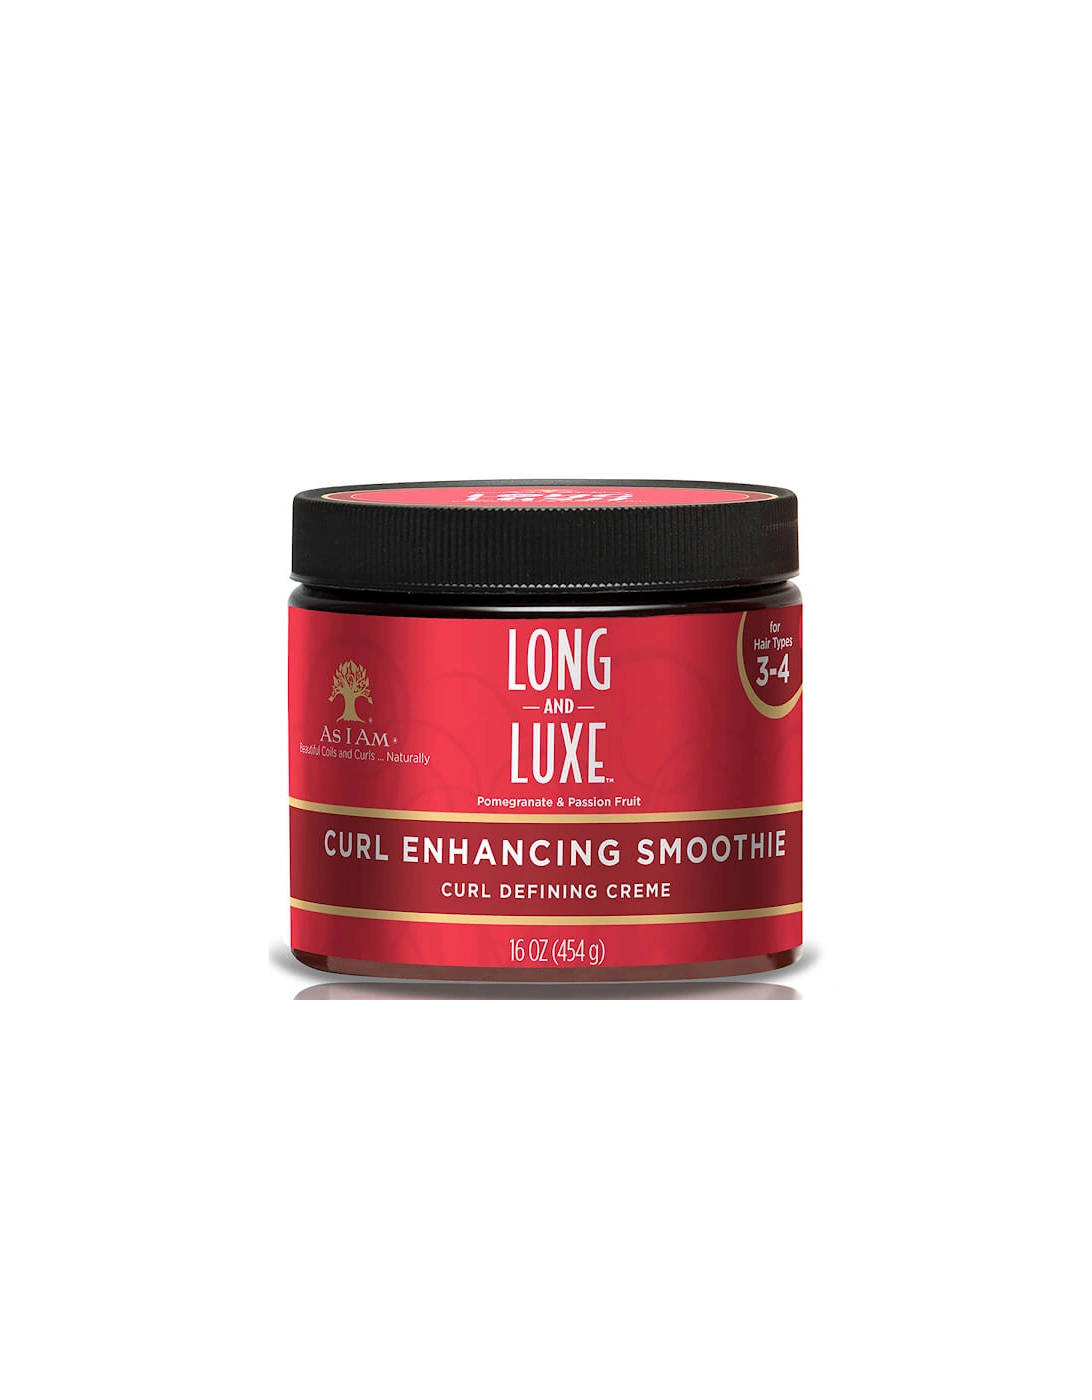 Long and Luxe Curl Enhancing Smoothie 454g - As I Am, 2 of 1